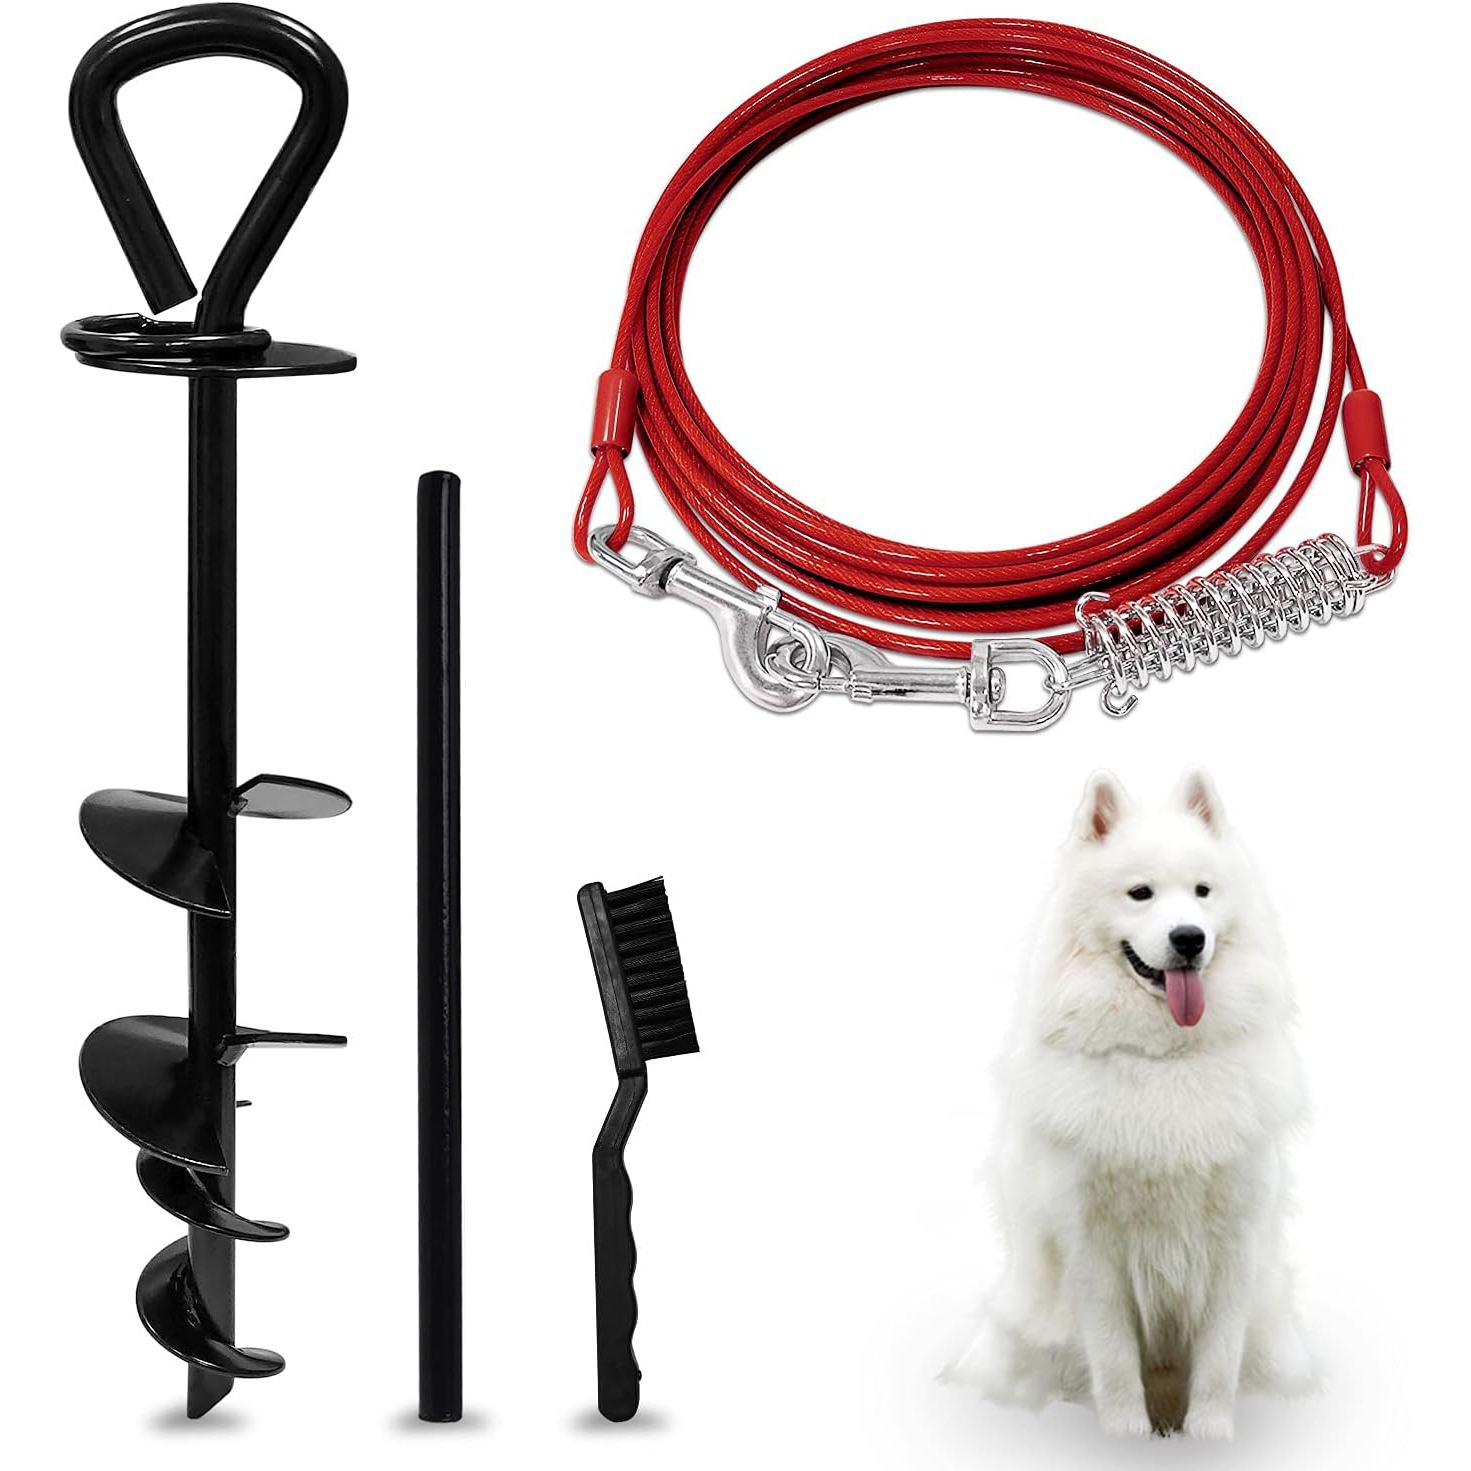 SHUNAI Dog Tie Out Cable and Stake